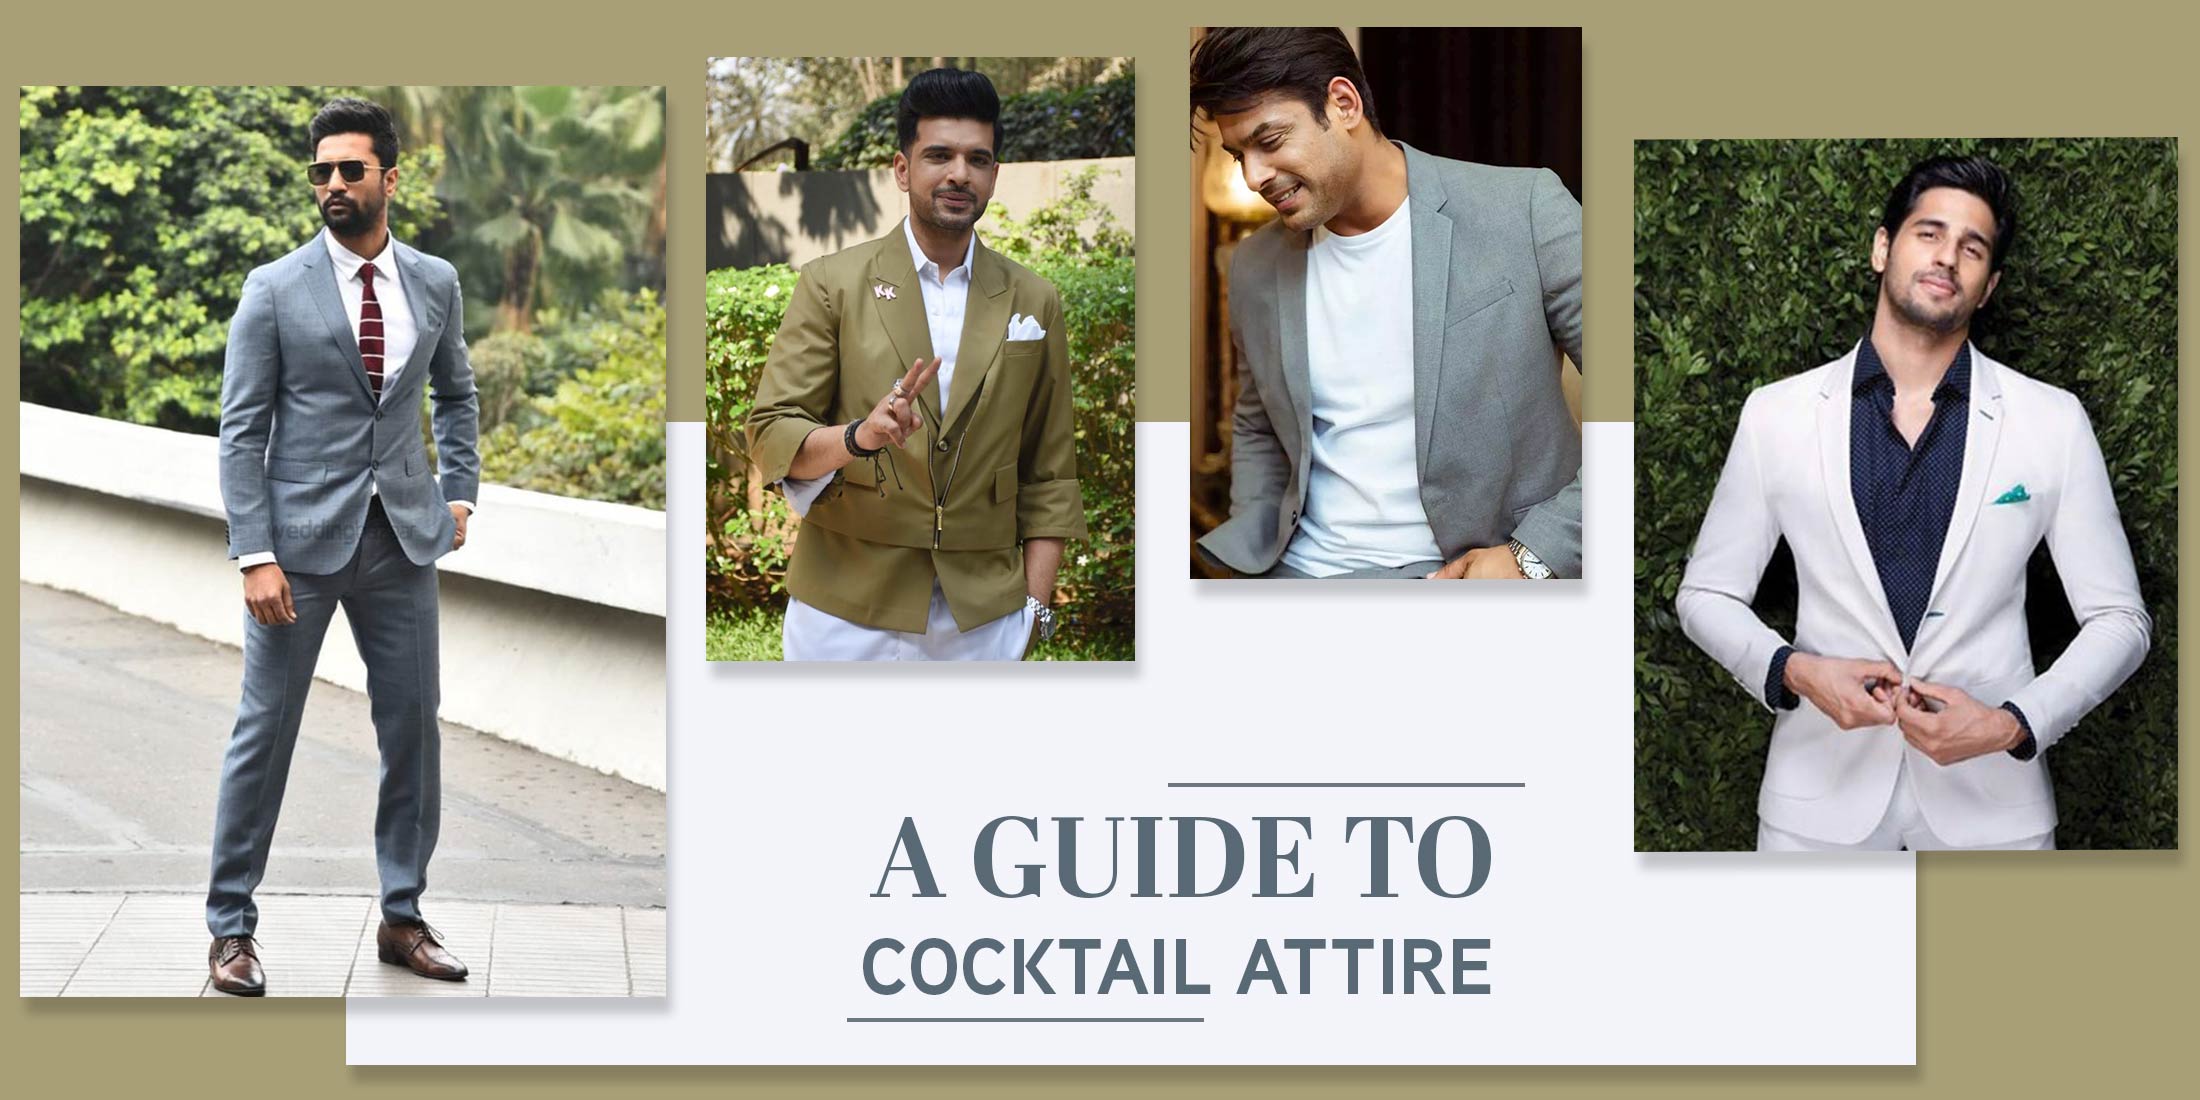 draft-what-to-wear-to-a-cocktail-party